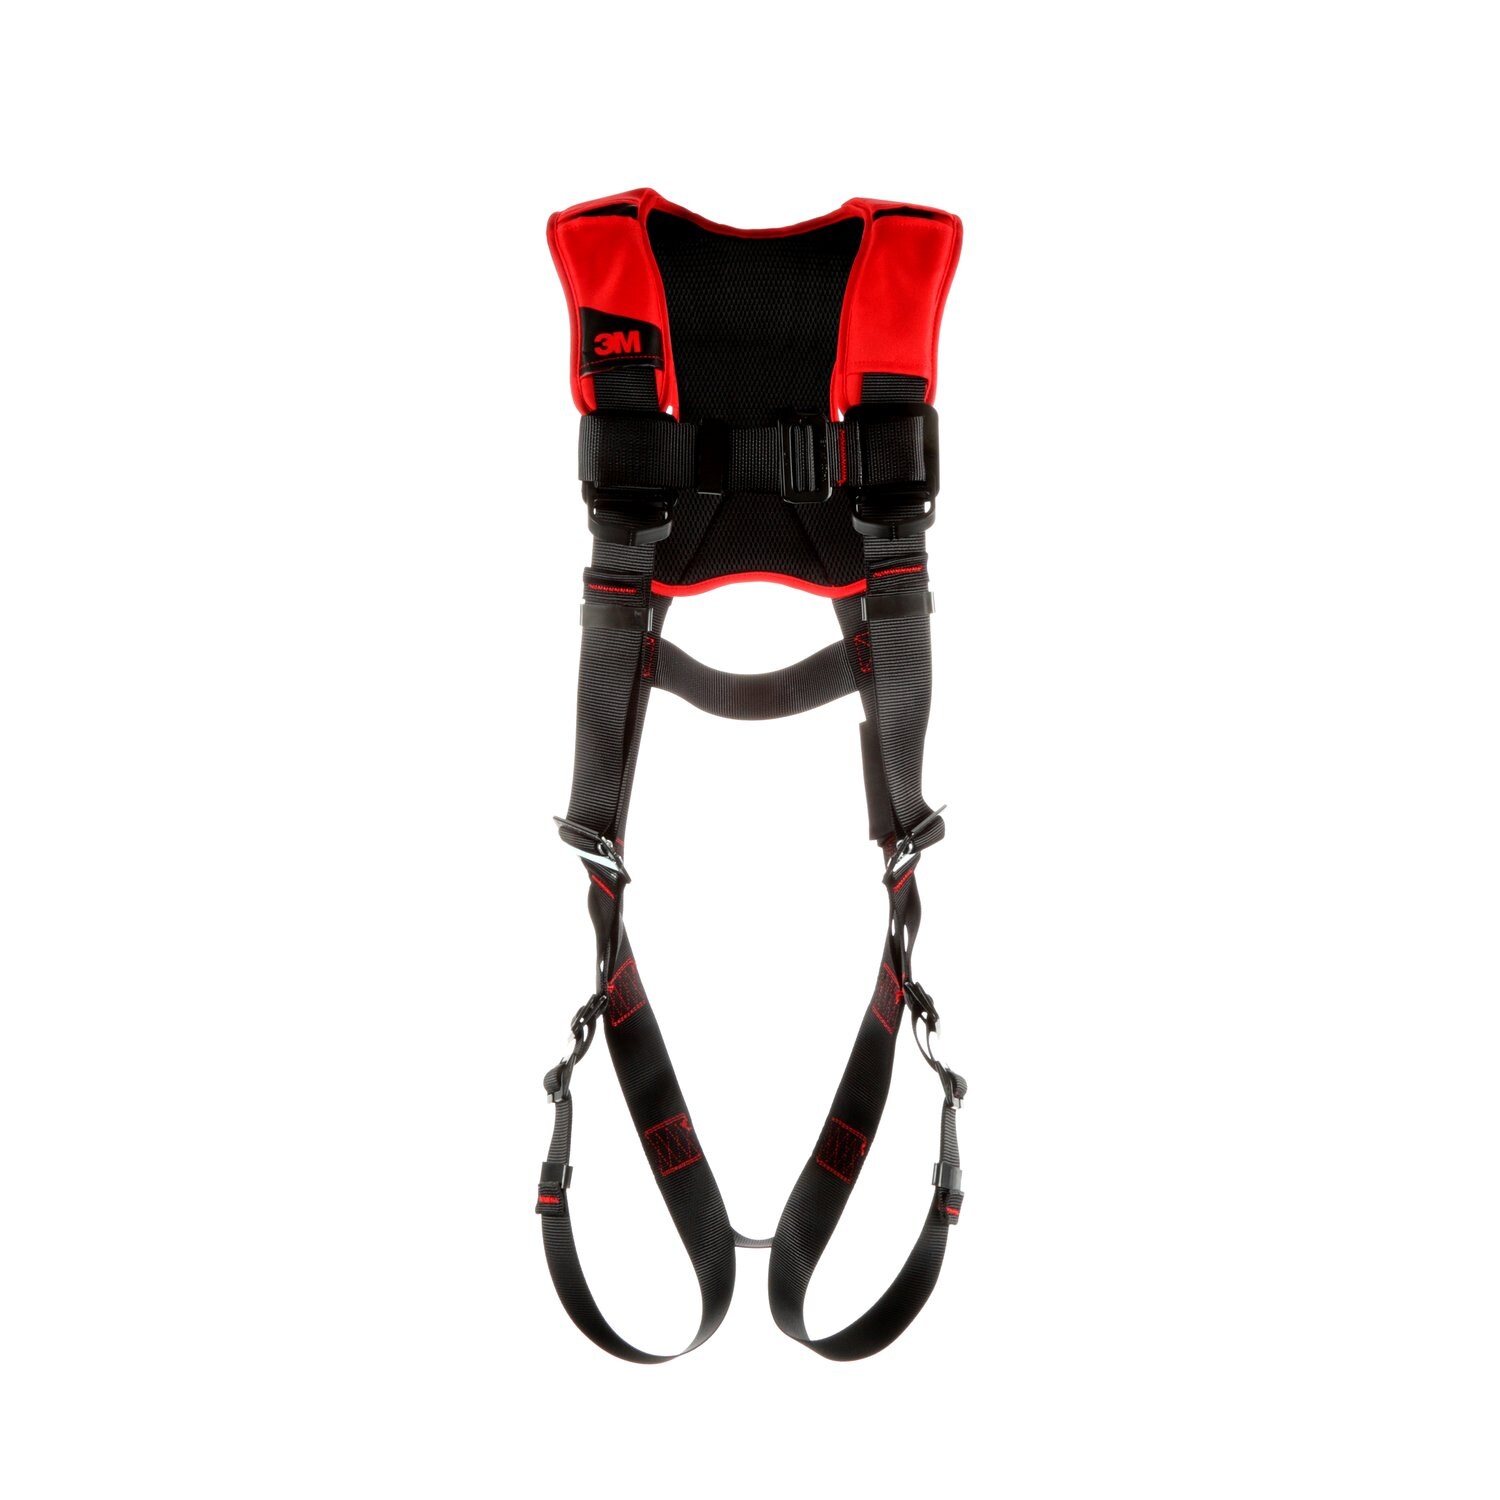 7012816699 - 3M Protecta P200 Comfort Vest Safety Harness 1161423, Small